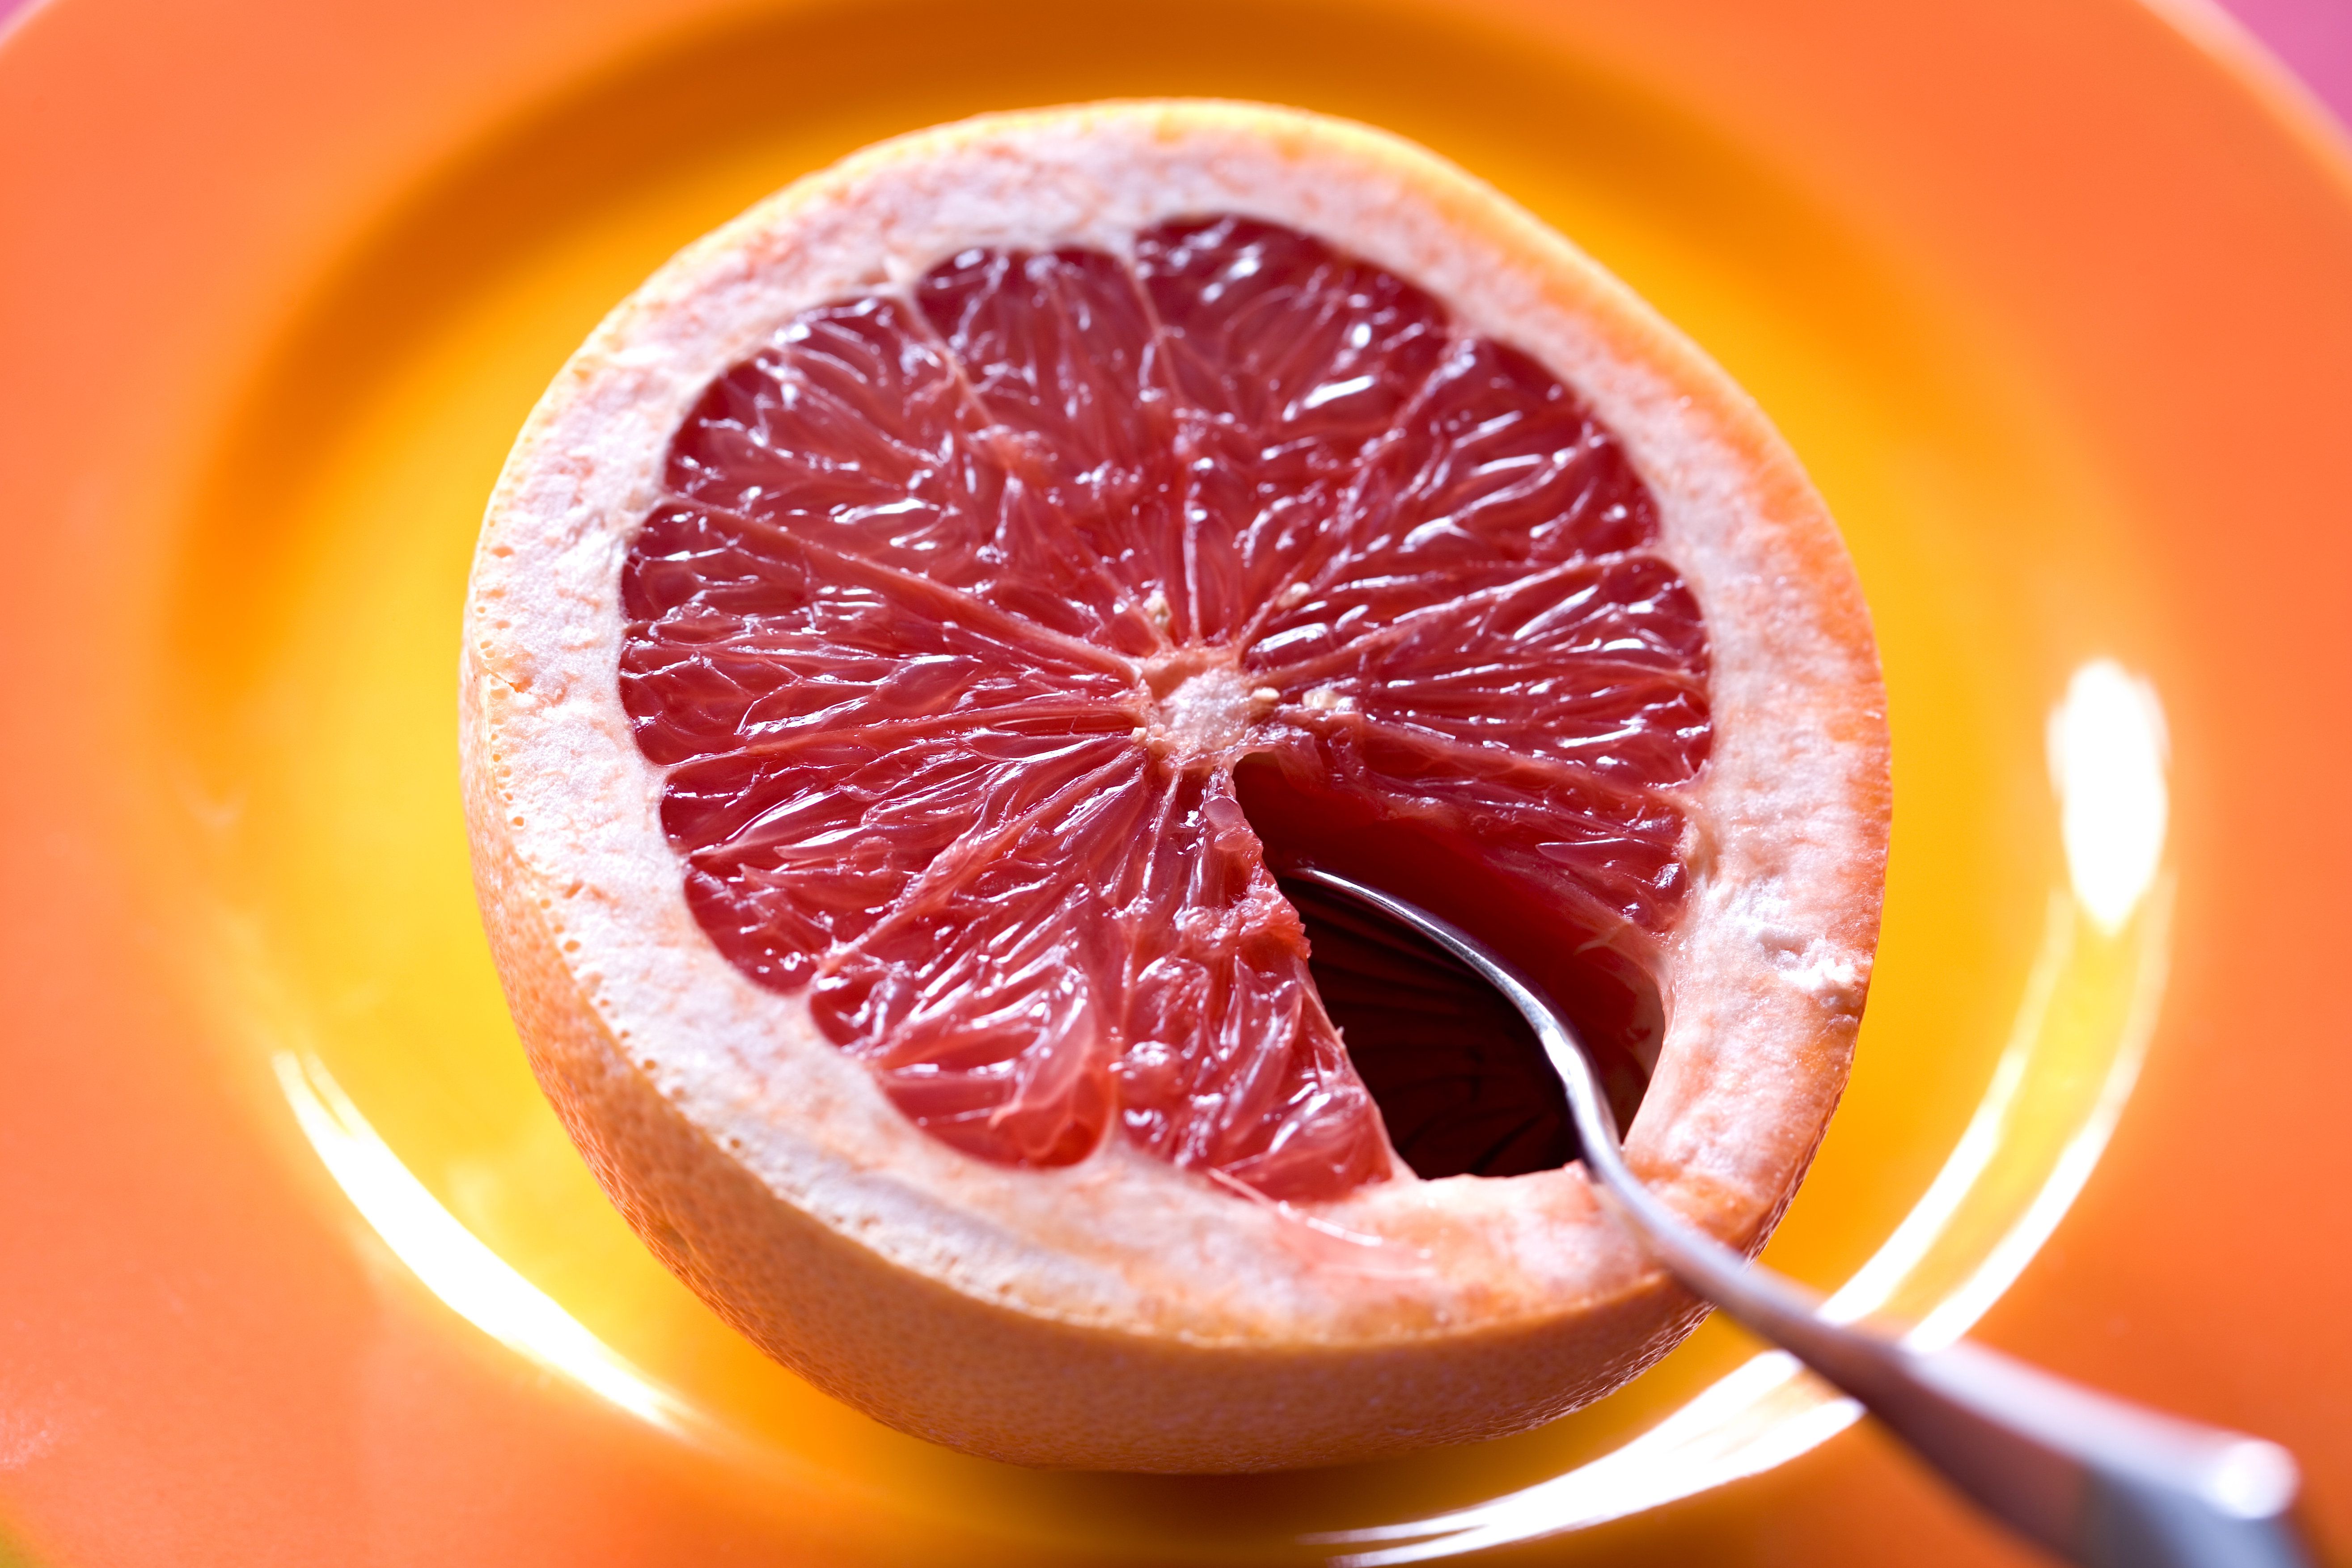 grapefruit nutrition facts carbs